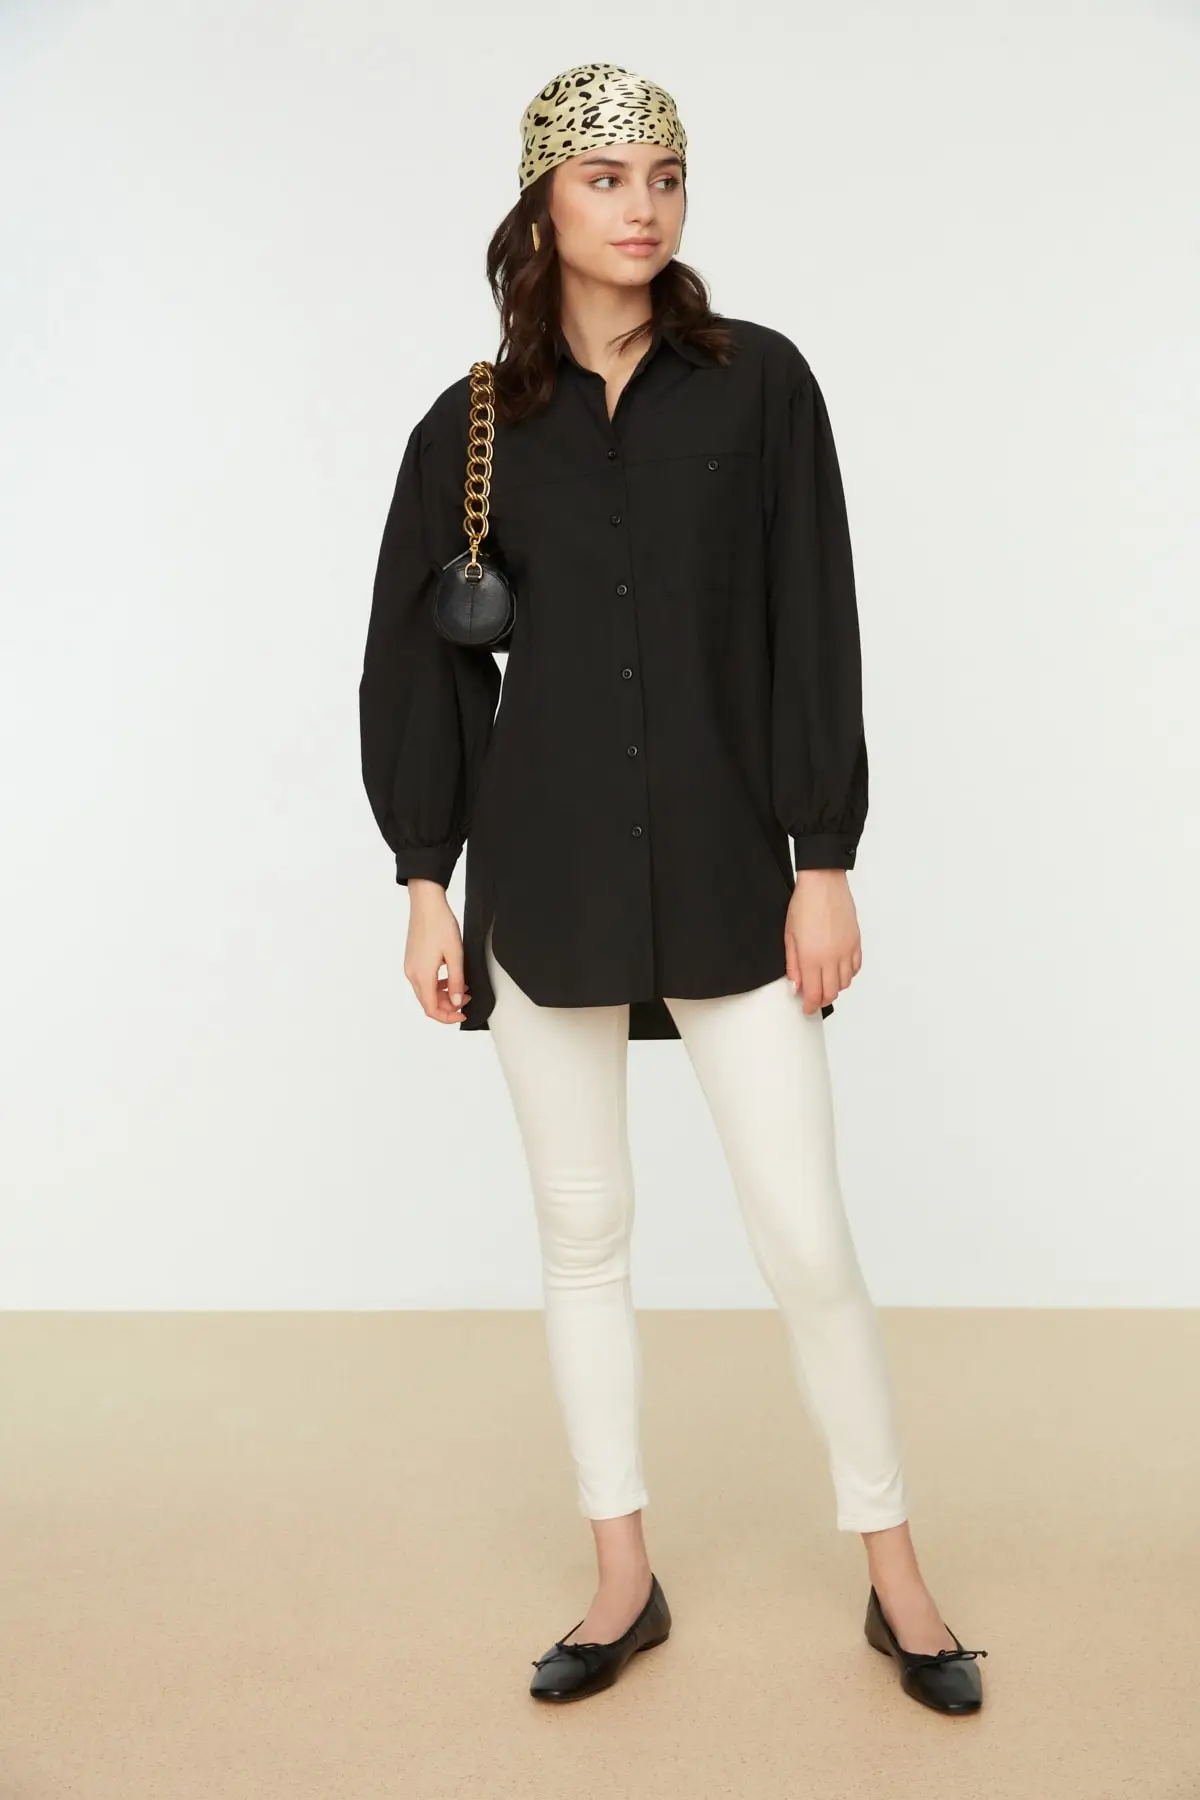 Black Balloon Sleeve Back Long Pocket Detail Basic Woven Shirt TCTSS21GO0976 Additional Feature Available Don 'T Single Flat Collar Casual